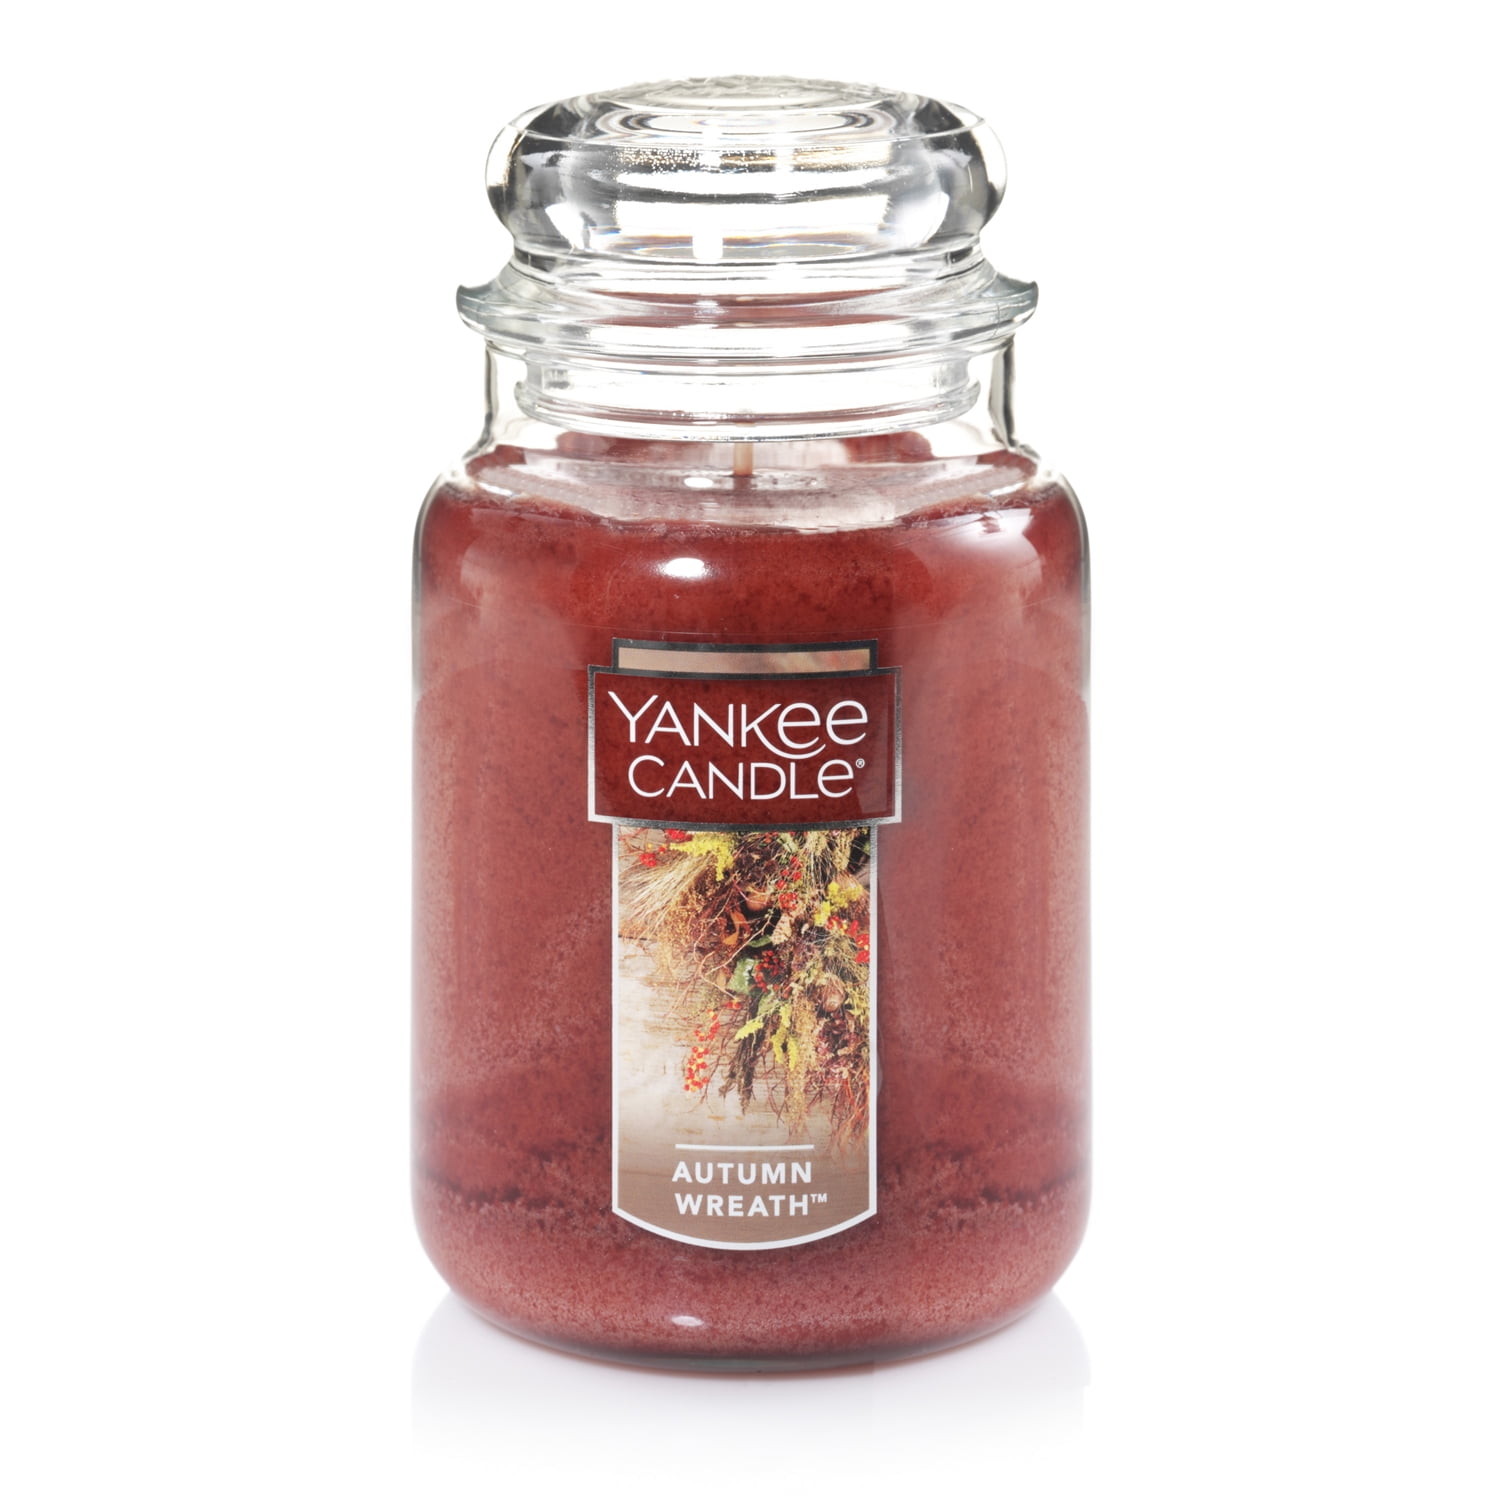 Yankee Candle Merry Berry - Original Large Jar Candle 